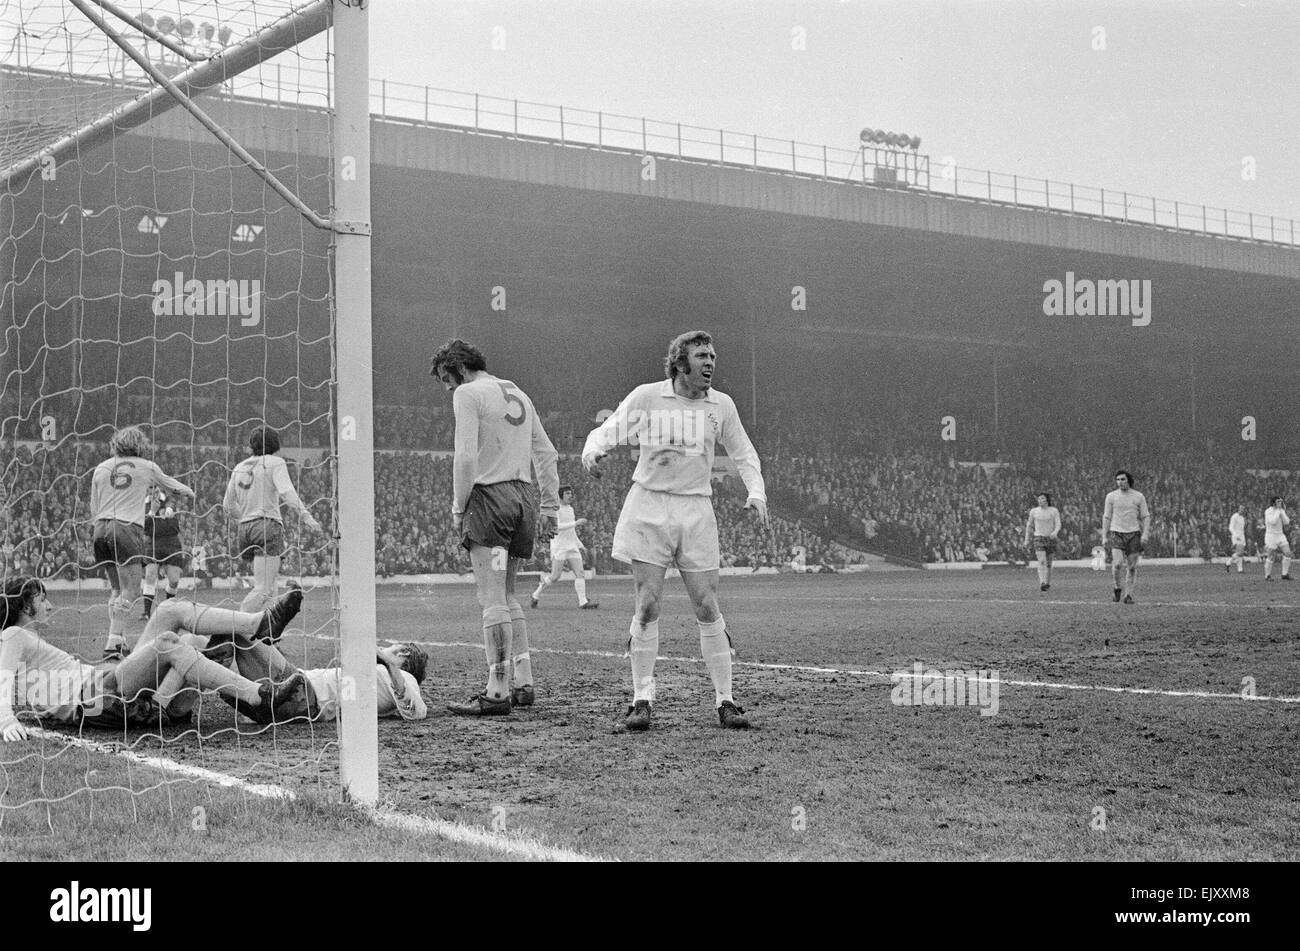 FA Cup Quarter Final match at Elland Road. Leeds United 2 v Tottenham Hotspur 1. Dismay from Mick Jones of Leeds after Eddie Gray missed a chance at goal. 18th March 1972. Stock Photo